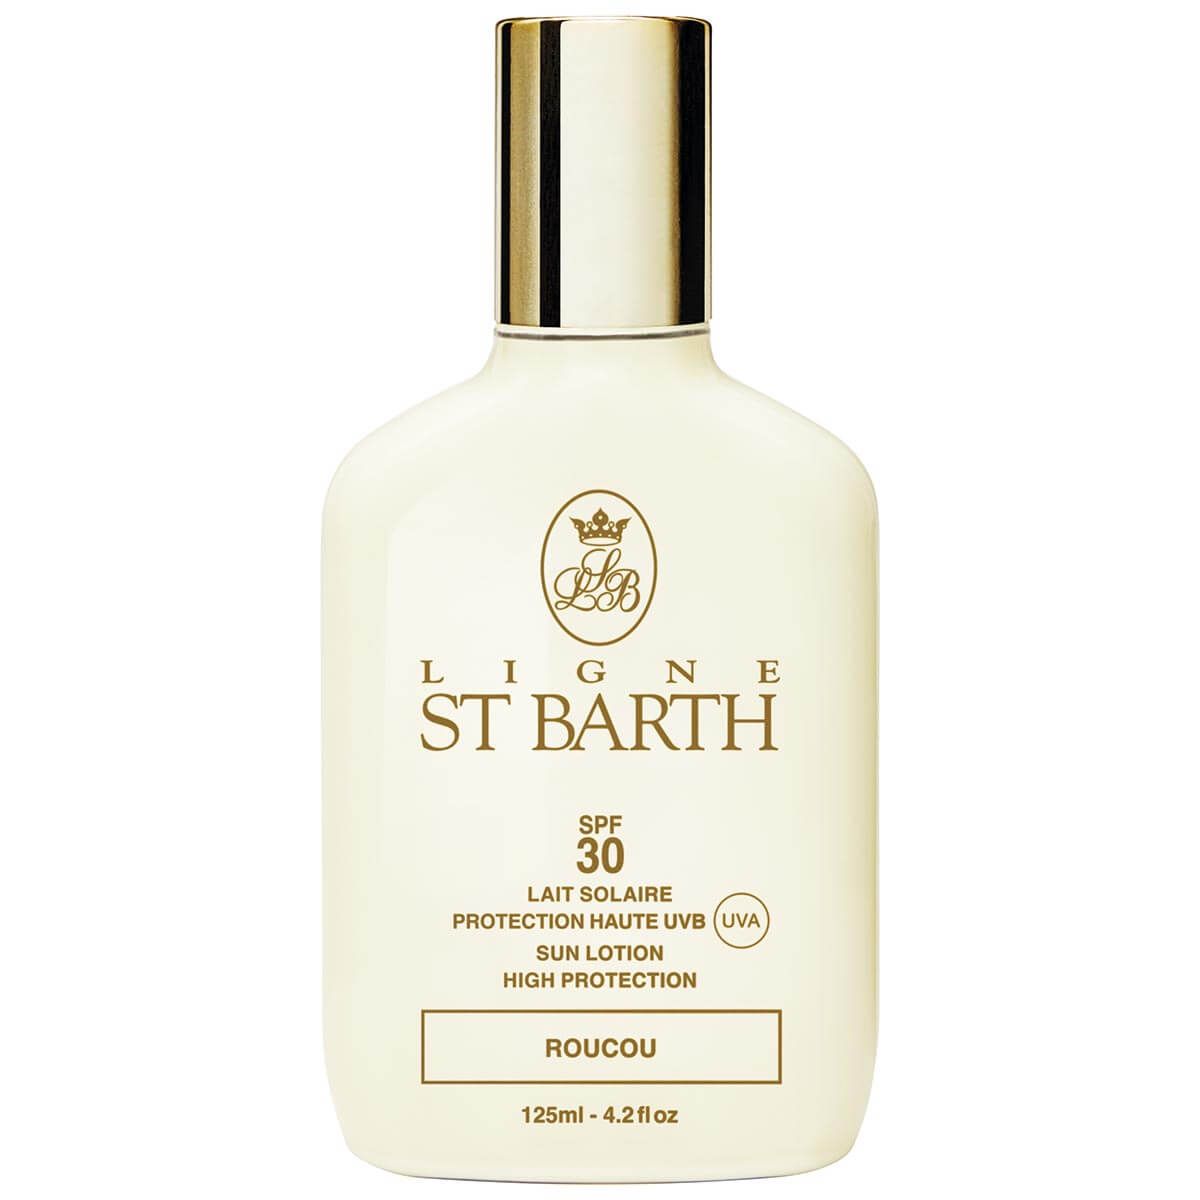 Ligne St. Barth Suscreen Lotion Roucou SPF 30